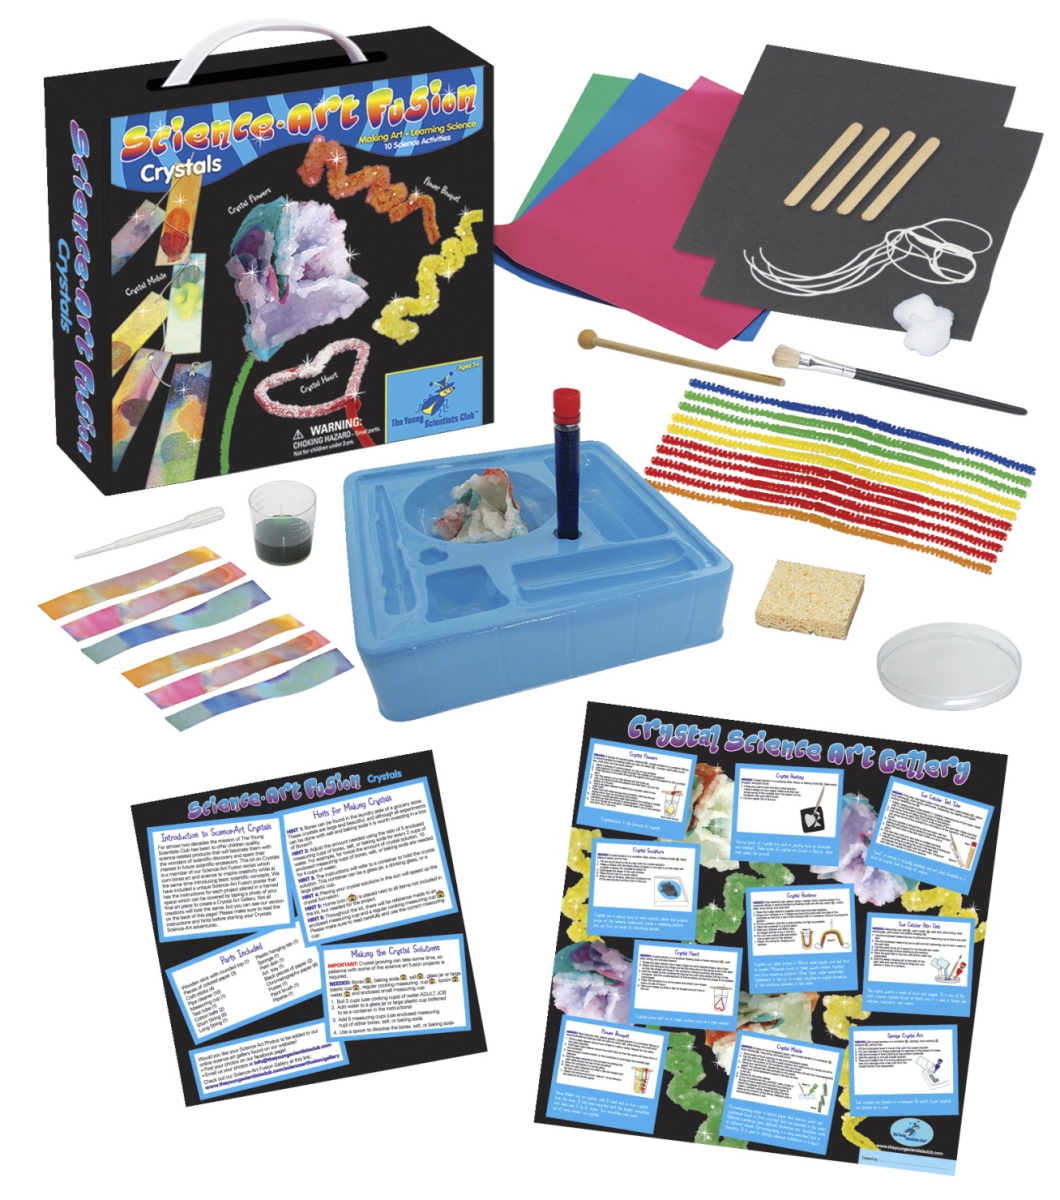 Young Scientists Club 1556790 Science-art Fusion Crystals Kit